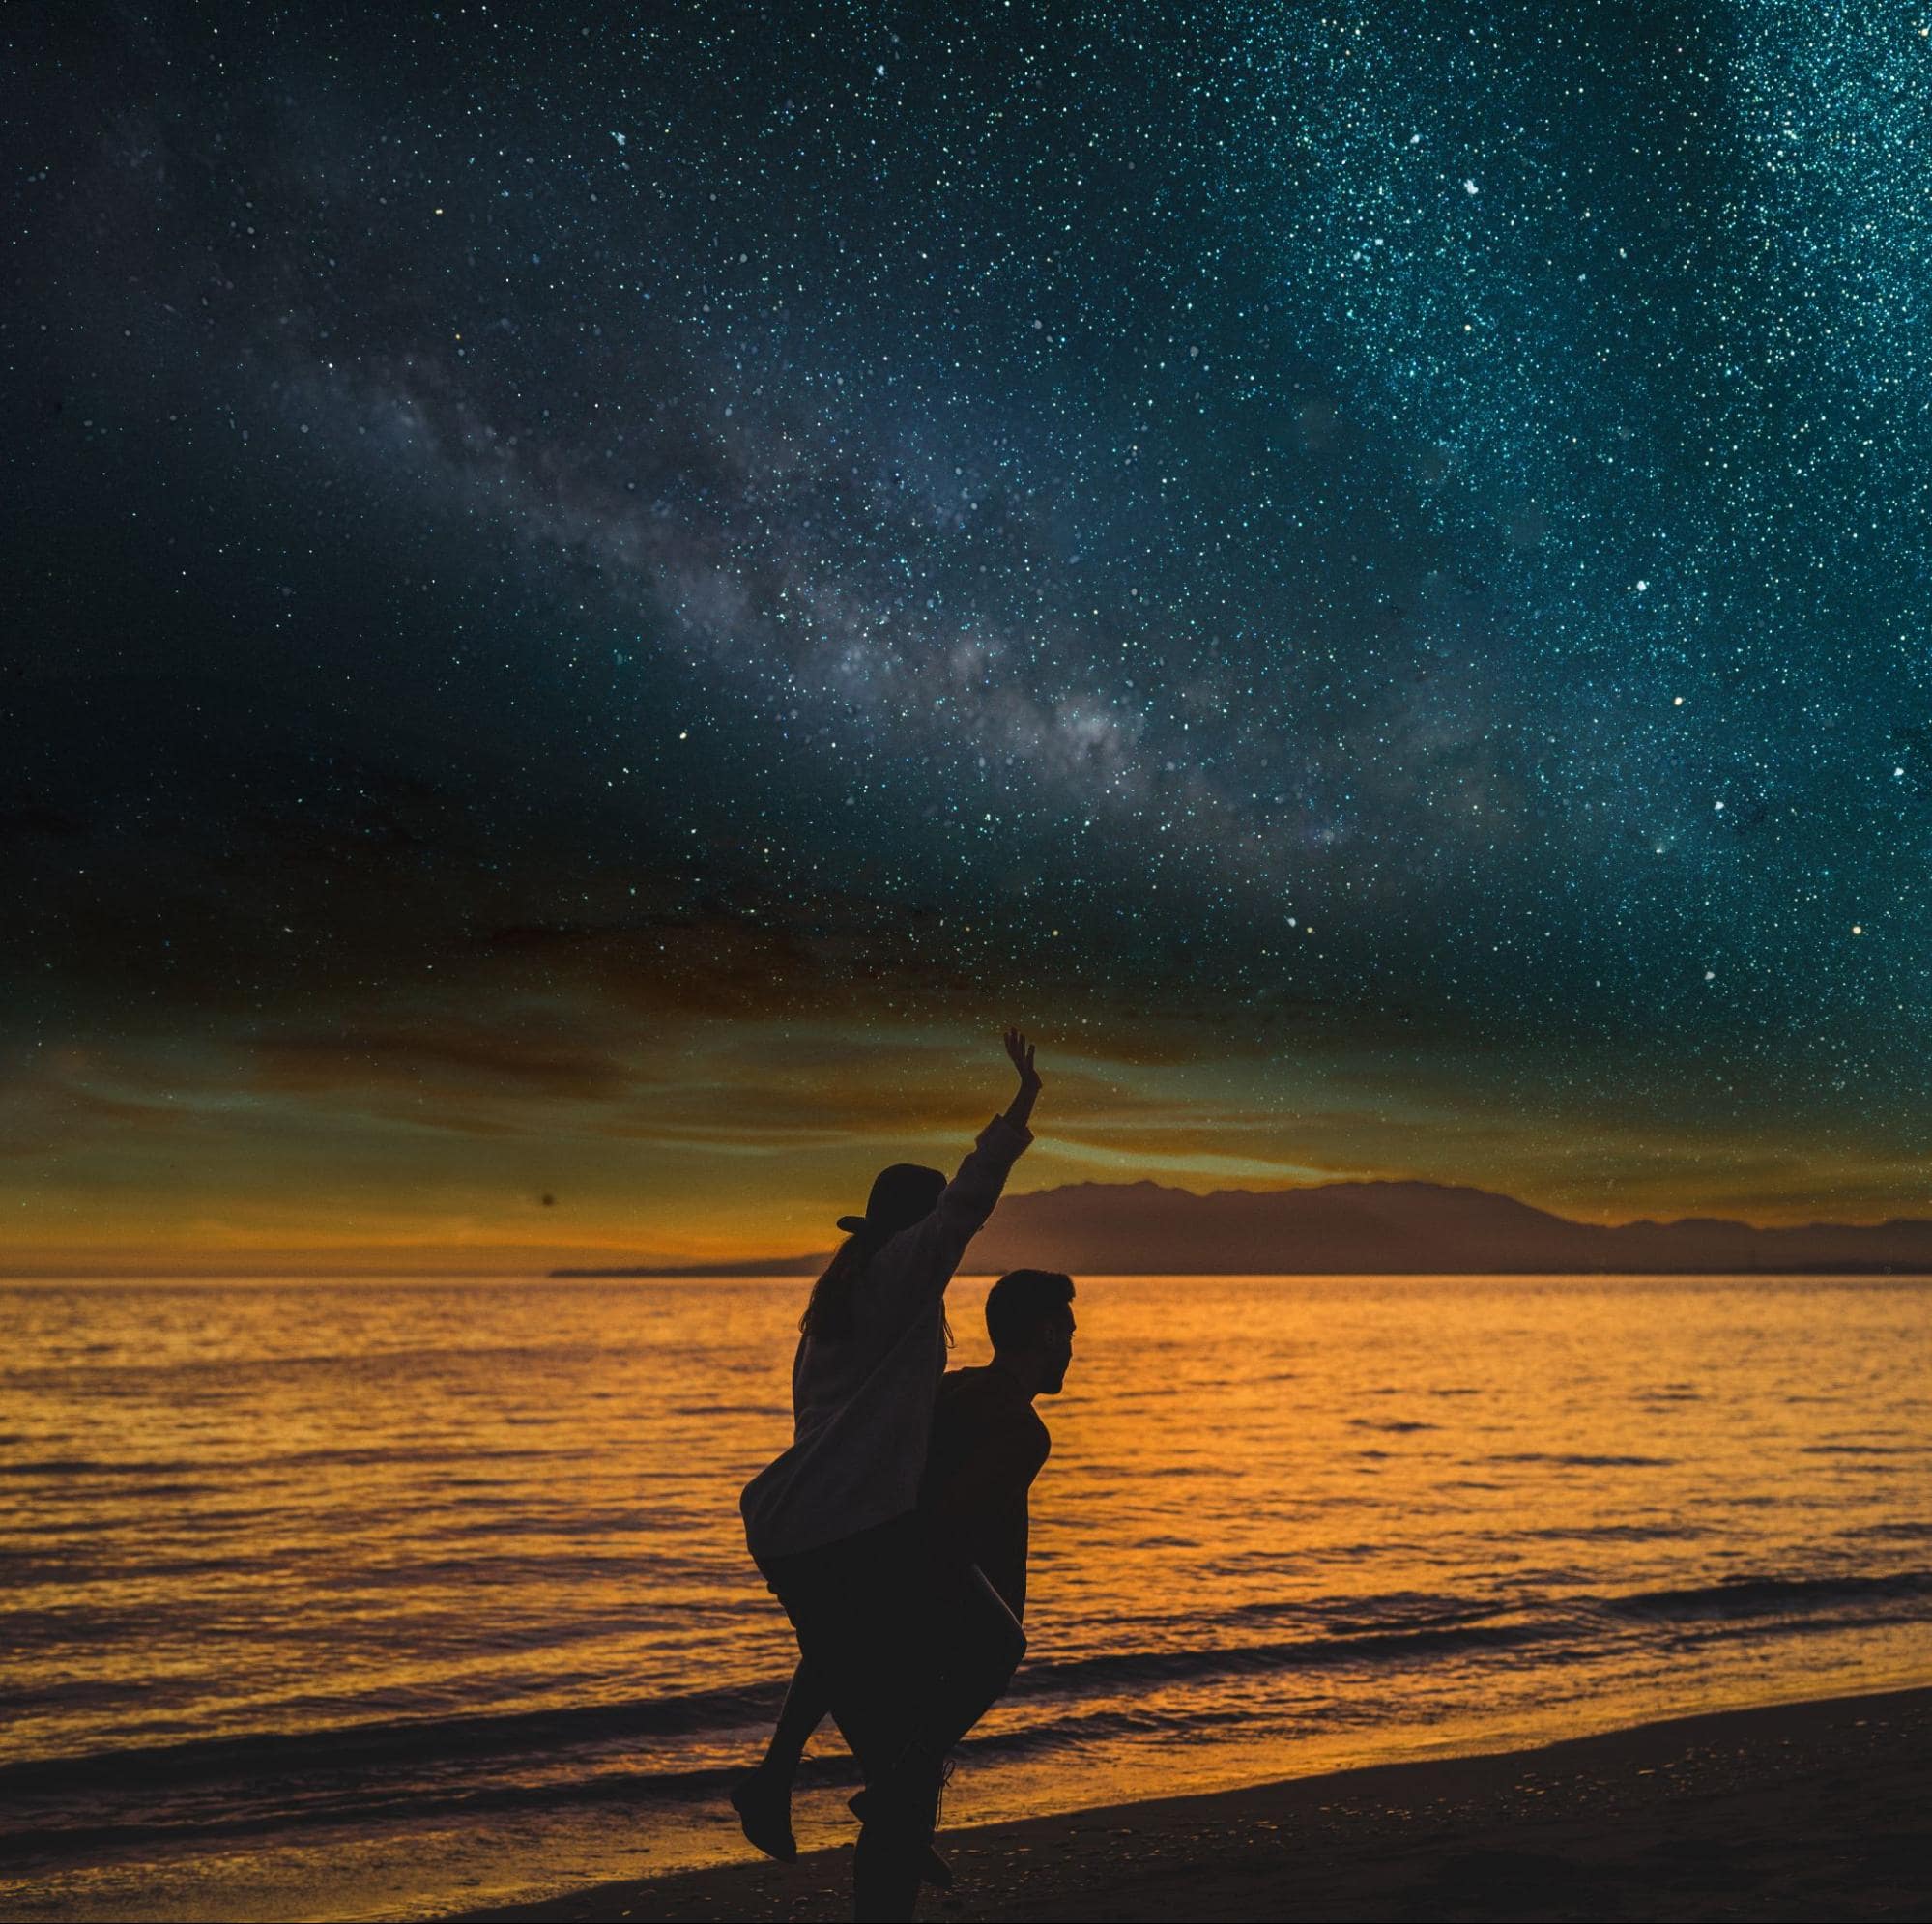  Stargazing couple on beach—unforgettable birthday gift experience for girlfriend